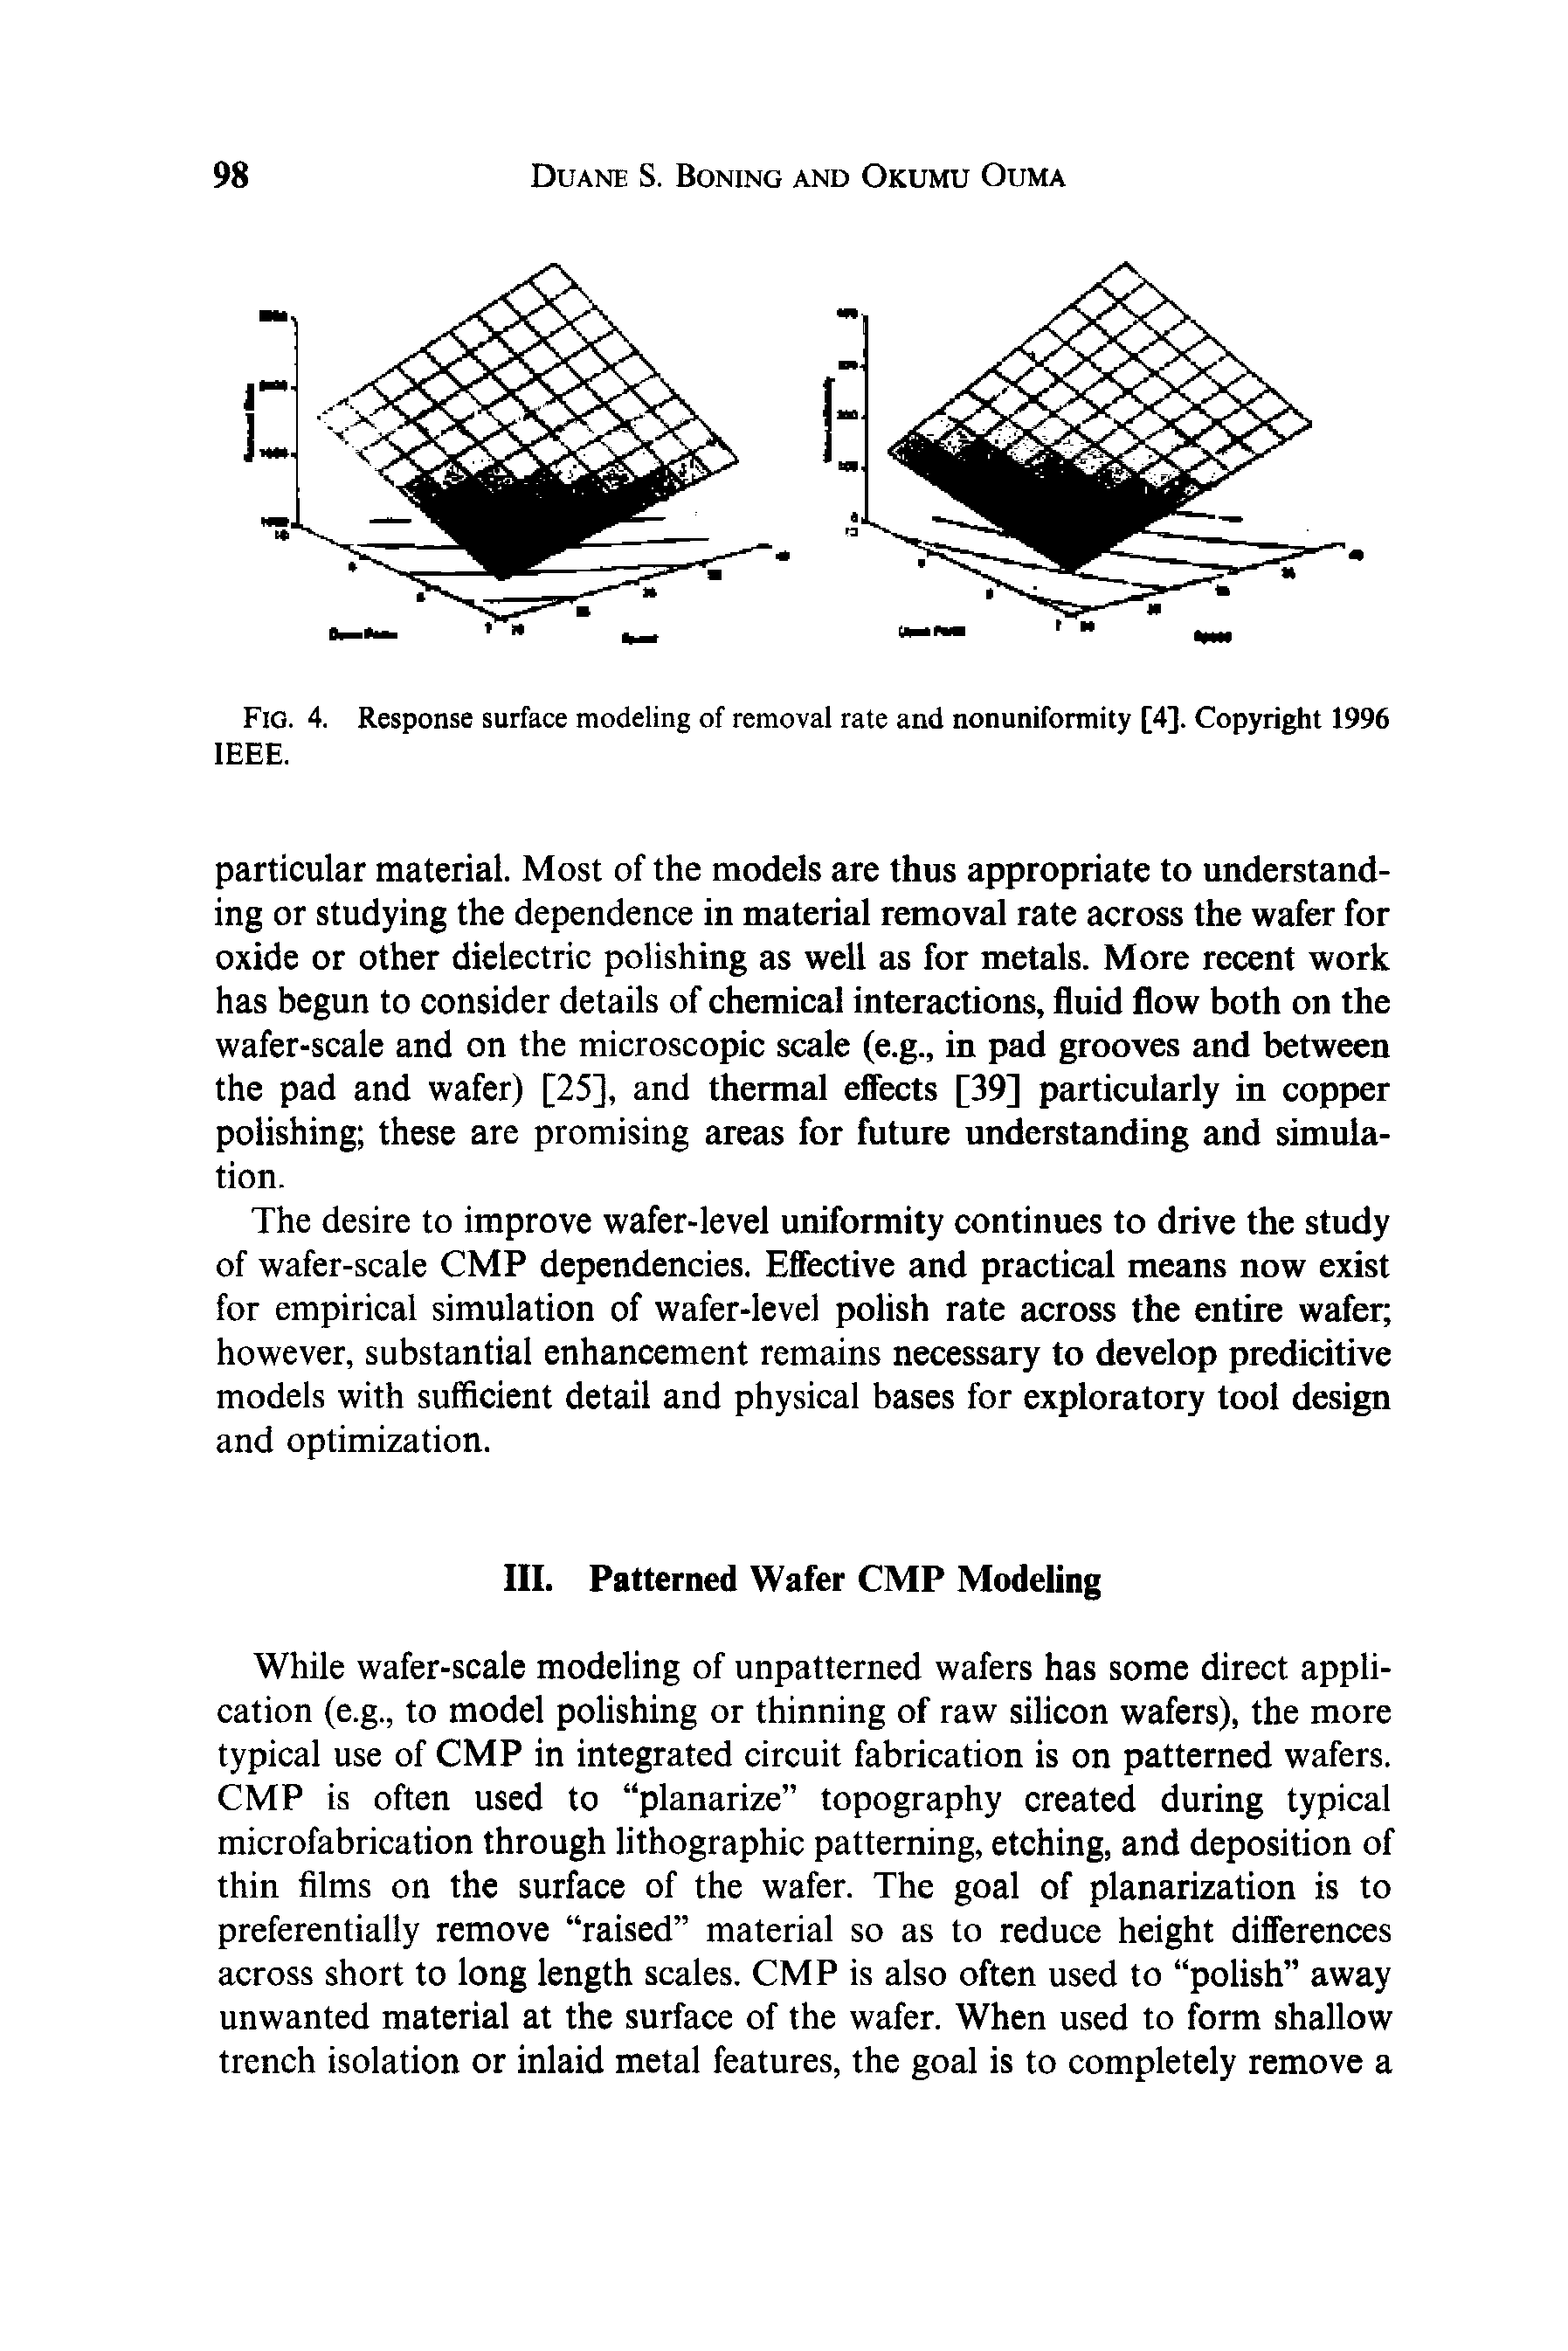 Fig. 4. Response surface modeling of removal rate and nonuniformity [4]. Copyright 1996 IEEE.